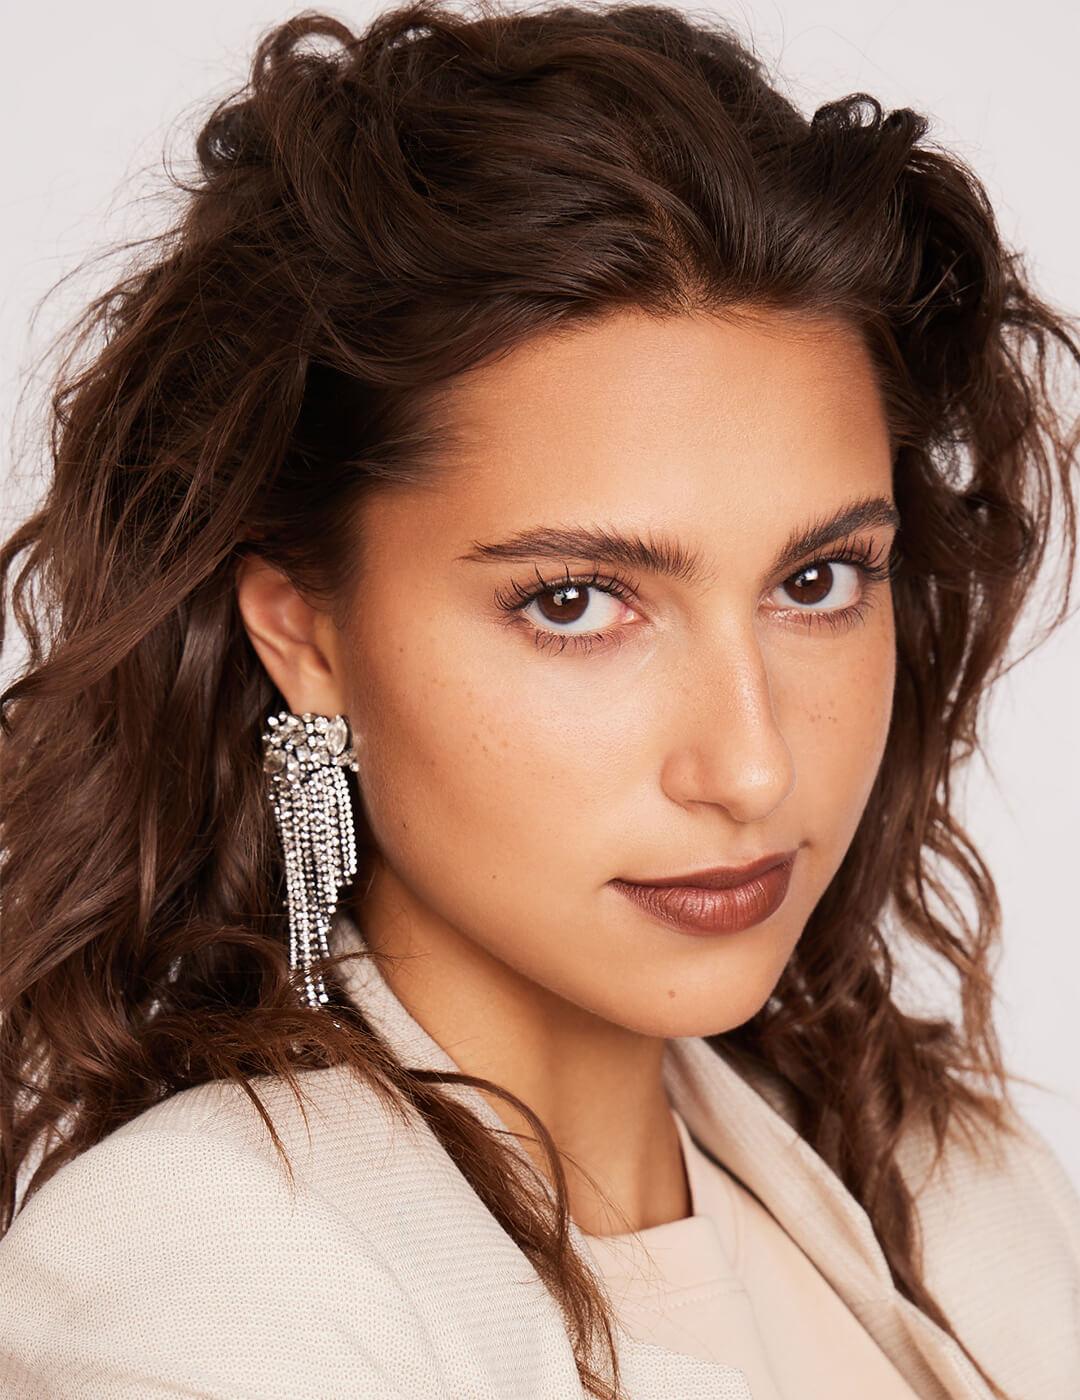 Close-up of a model rocking a wavy side part hairstyle, silver dangling earrings, and a minimal makeup look with brick red lips